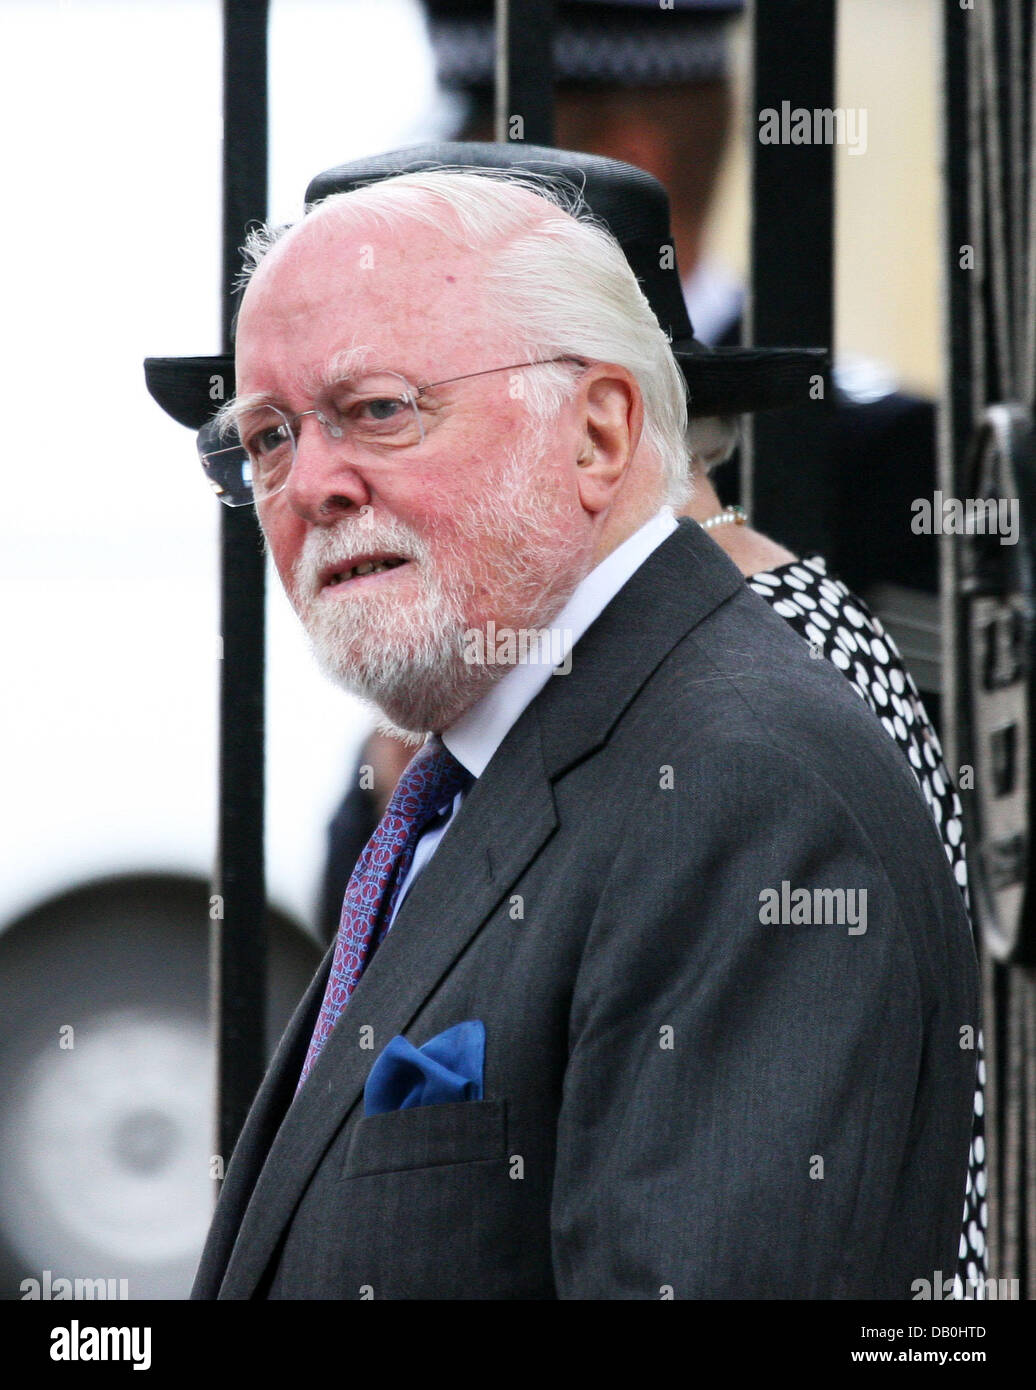 Lord Richard Attenborough arrives for the Service of Thanksgiving for the life of Diana, Princess of Wales, at the Guards' Chapel in London, England, 31 August 2007. Prince William and Prince Harry organised the Thanksgiving Service to commemorate the life of their mother on the tenth anniversary of her death. Photo: Albert Nieboer (NETHERLANDS OUT) Stock Photo